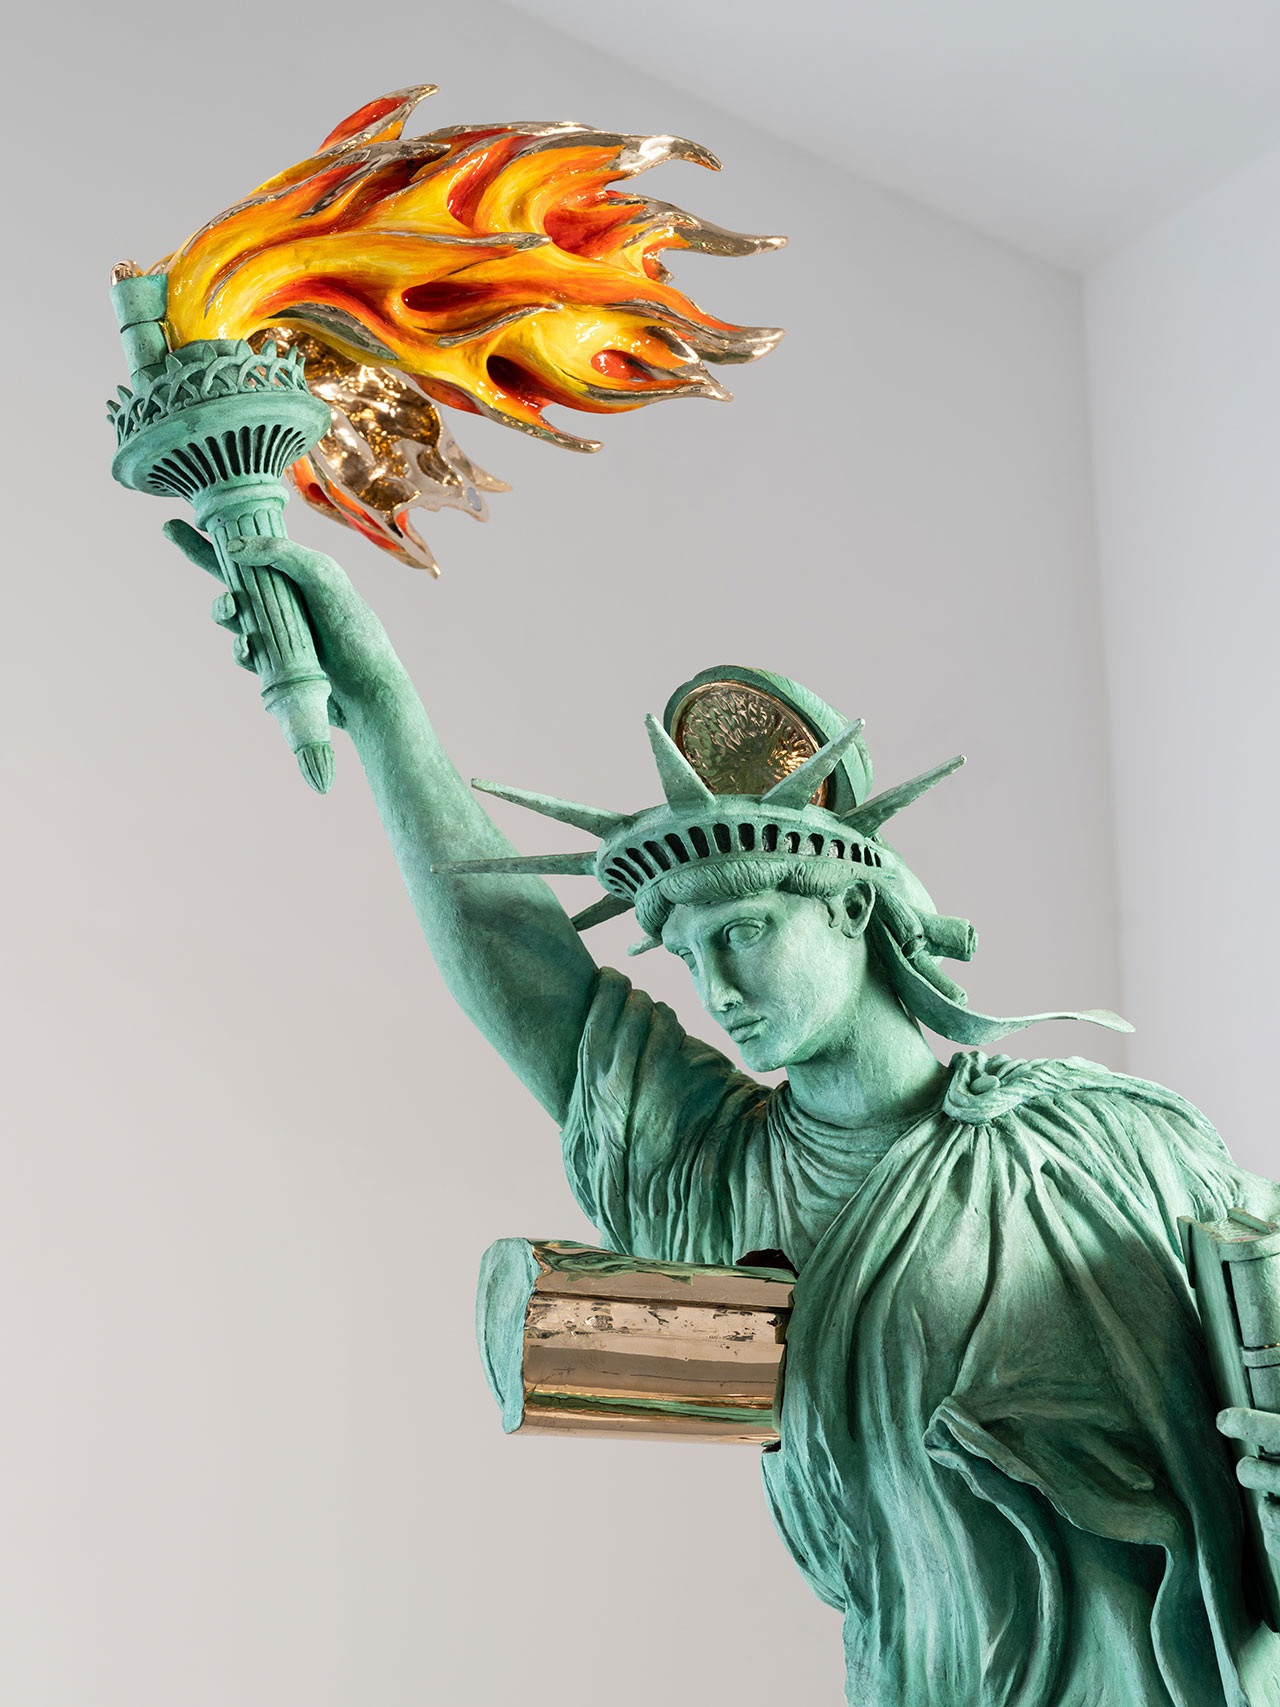 Installation view. "The American Job" by Studio Job at R &amp; Company gallery, New York, Nov 4, 2022 - Jan 27, 2023. Courtesy of Studio Job.
Featured: Lady Liberty, 2020-2022. Illuminated sculpture in polished, patinated, and hand-painted bronze. Edition of 5 + 2 APs + Prototype.